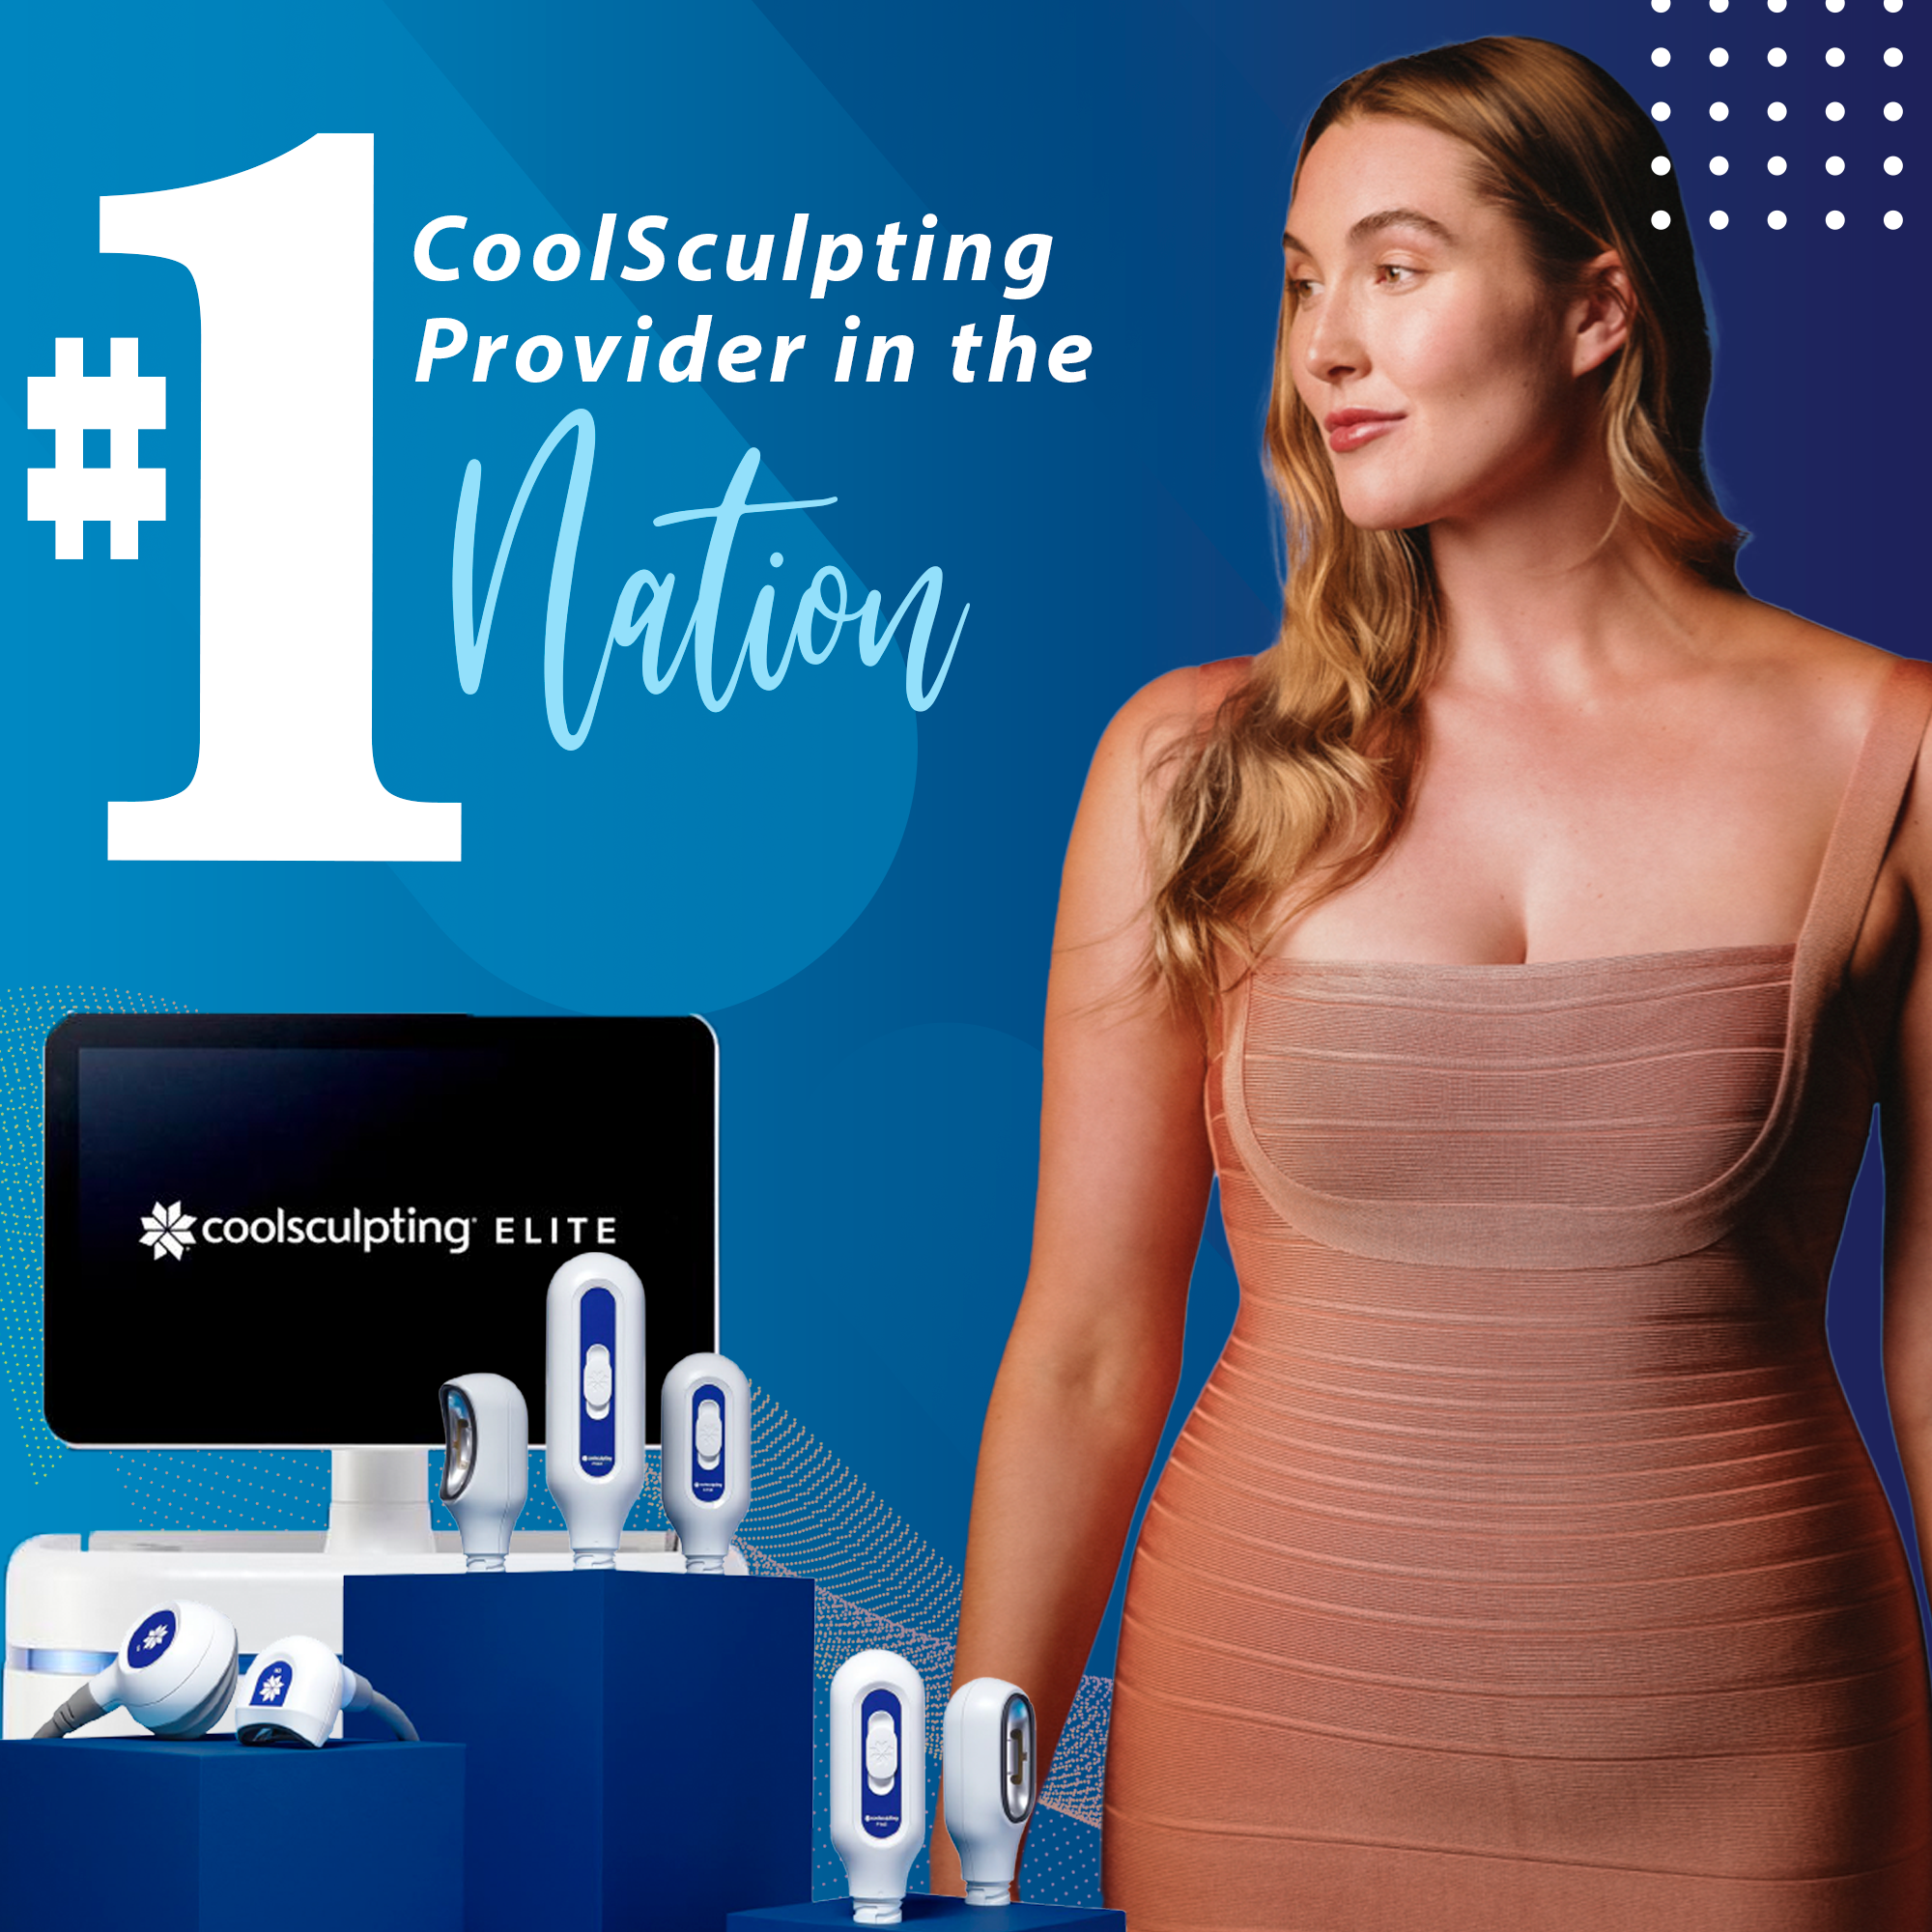 Bodenvy best place for coolsculpting Orlando - Dr. Phillips near me